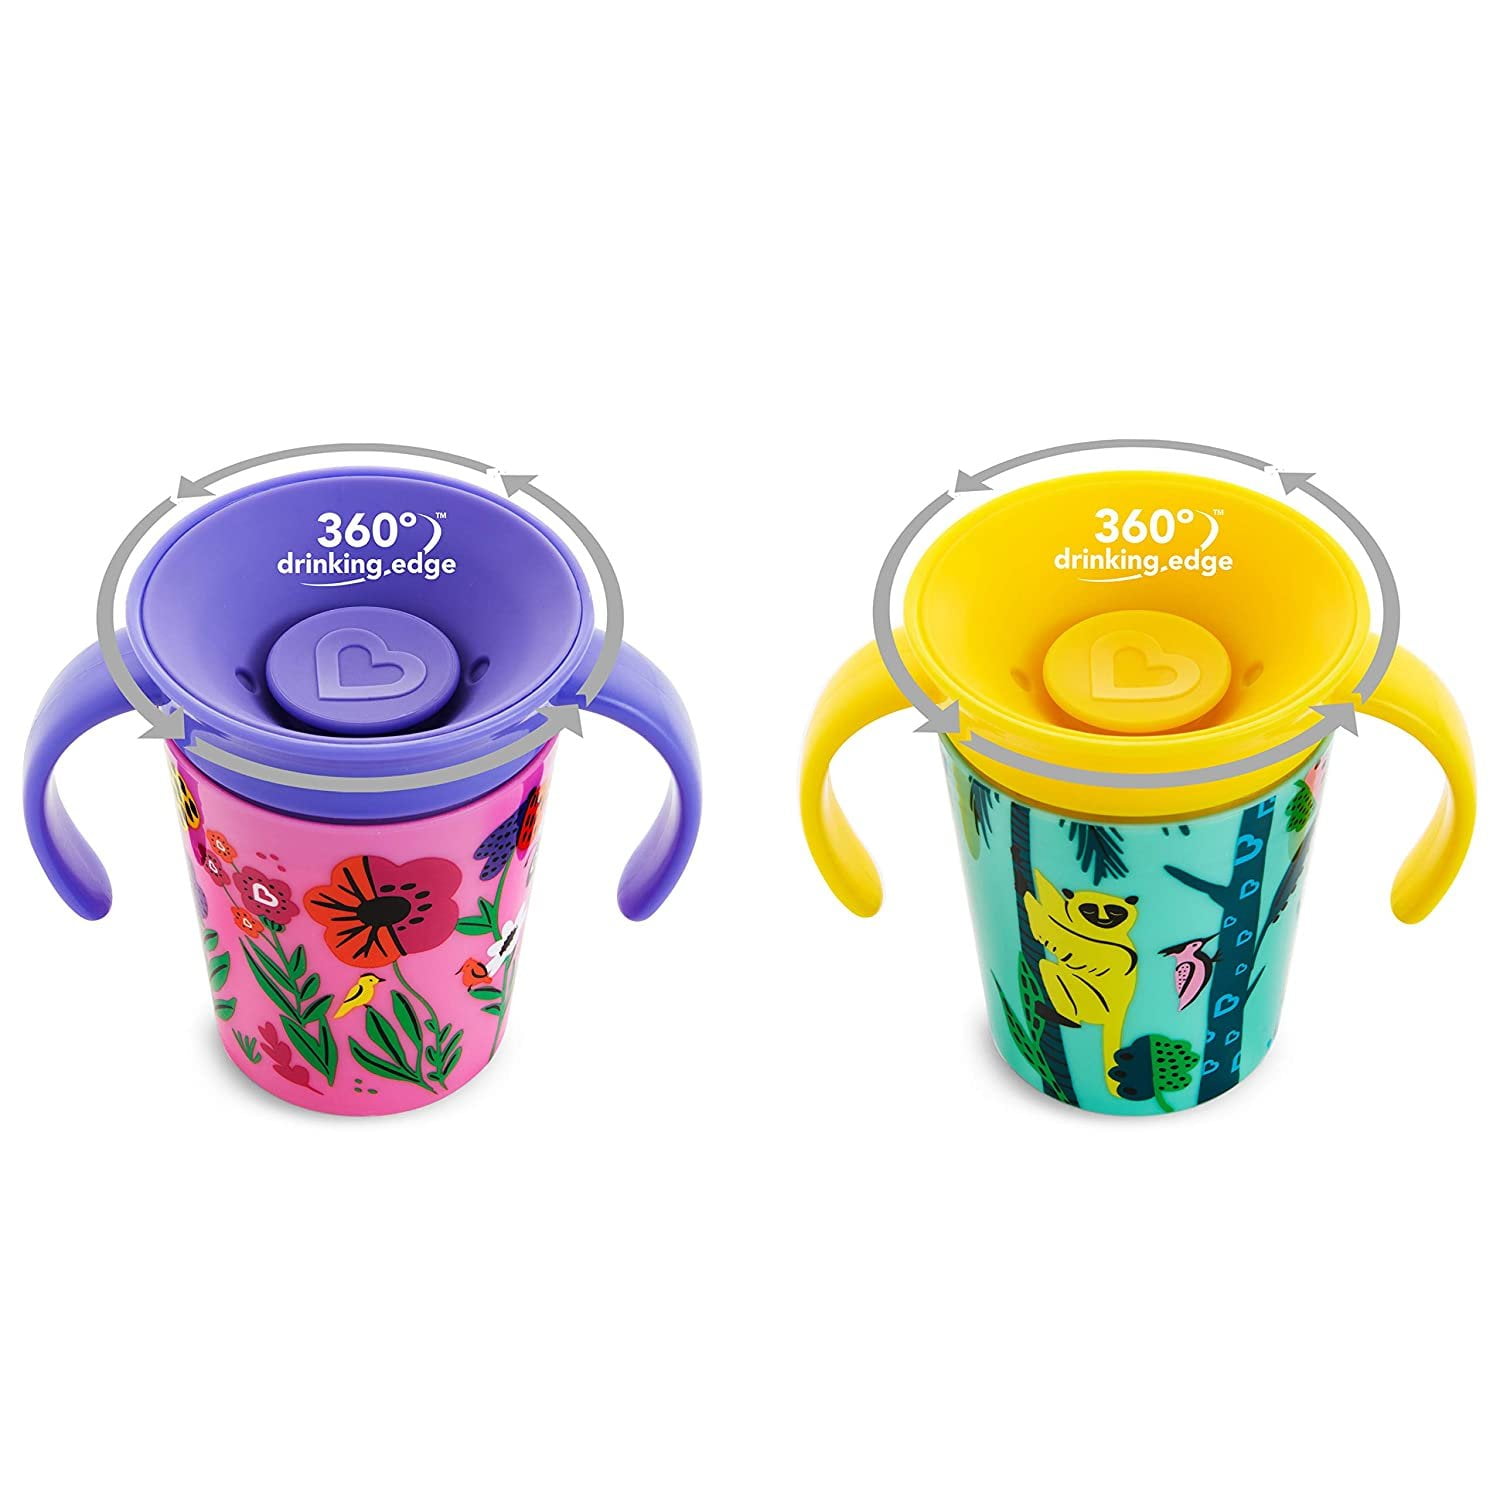 Monee Sippy Cup Cap 20 | Convert Store Bottles to Toddler Cups Instantly | Screw-On Cap for Instant 360 Cups for Toddlers Toddler Sippy Cups or Kids S